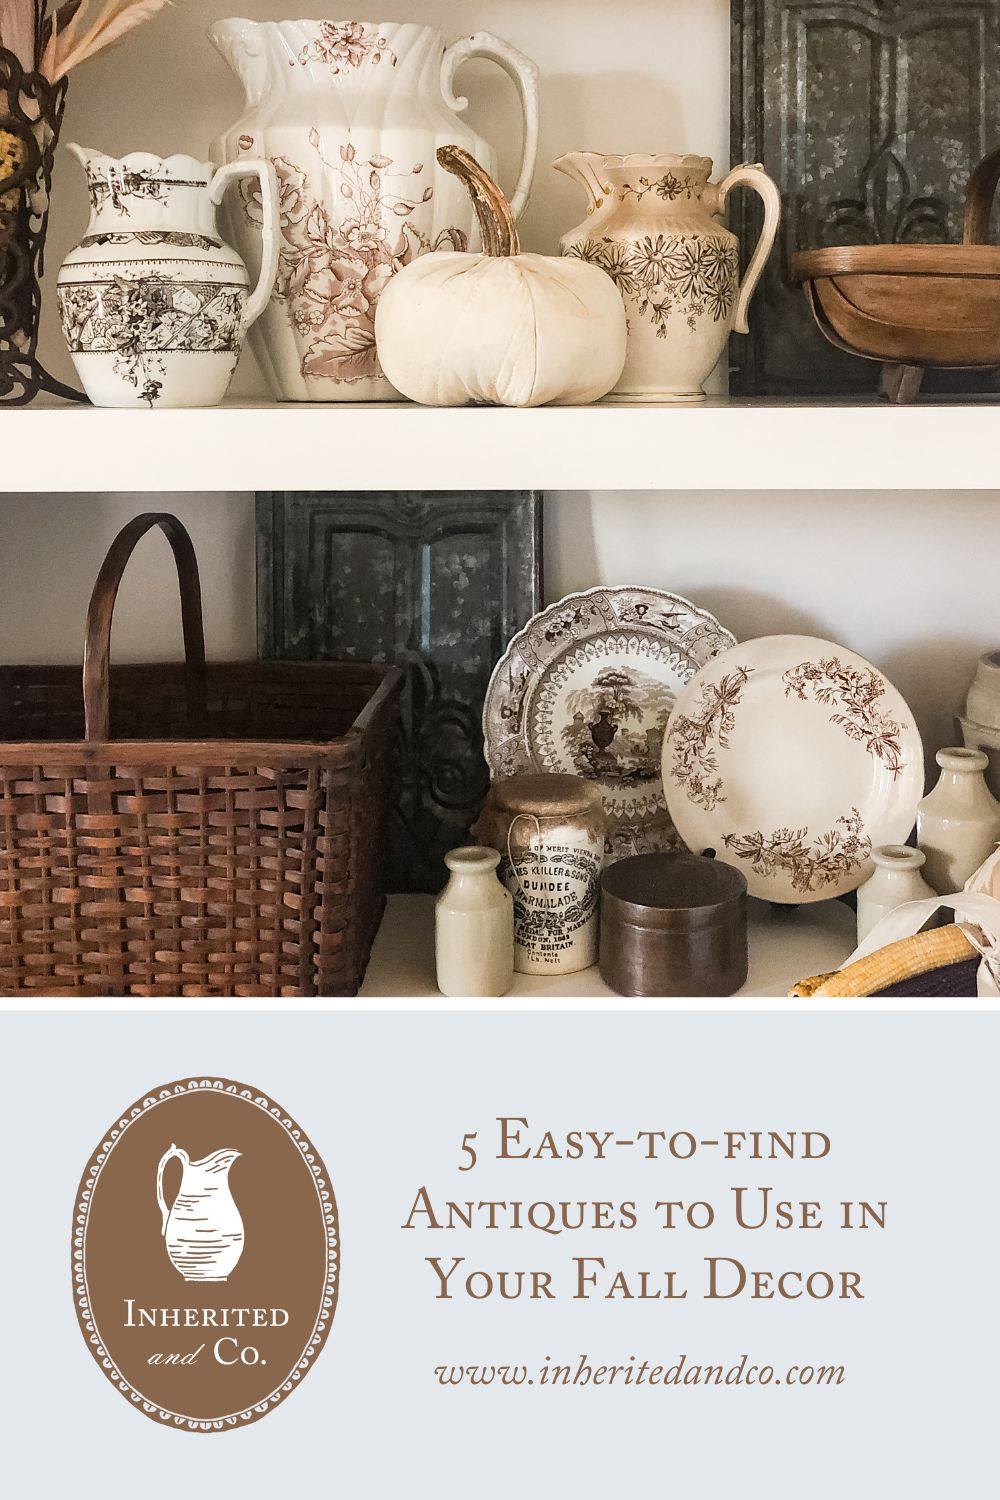 Two built-in white shelves filled with antiques such as brown transferware baskets stoneware weathered metal copper dried corn and a quilt pumpkin with a graphic below that has the blog title listed